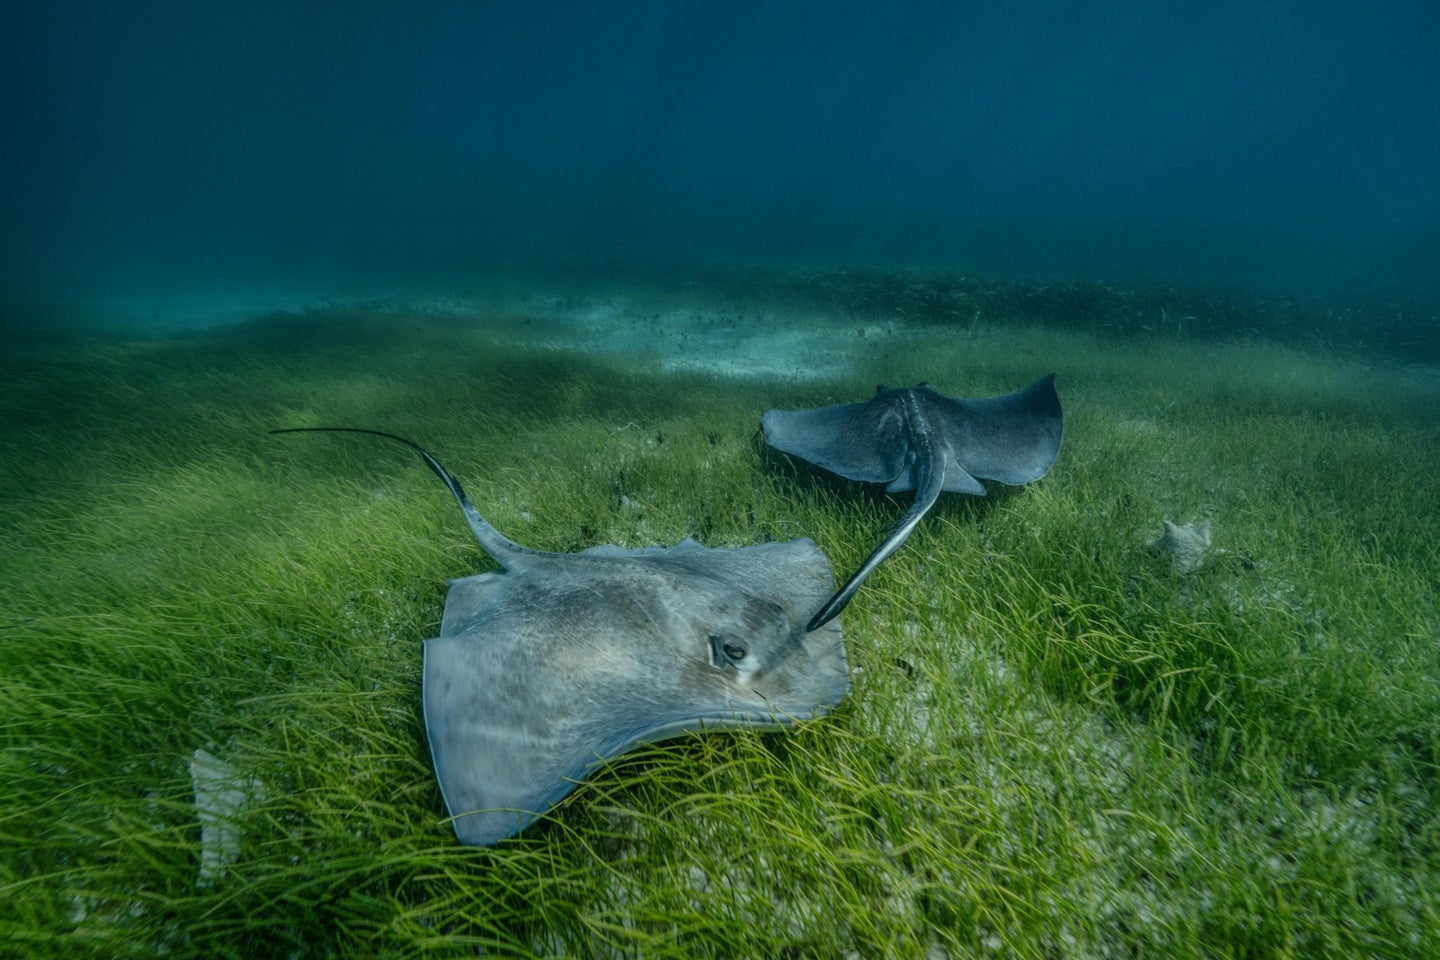 Seagrass meadows are more than just blue carbon sinks, and act as feeding and nursery grounds for an abundance of marine life–such as elasmobranchs like sharks and rays, and economically and culturally significant species like Queen Conch.
